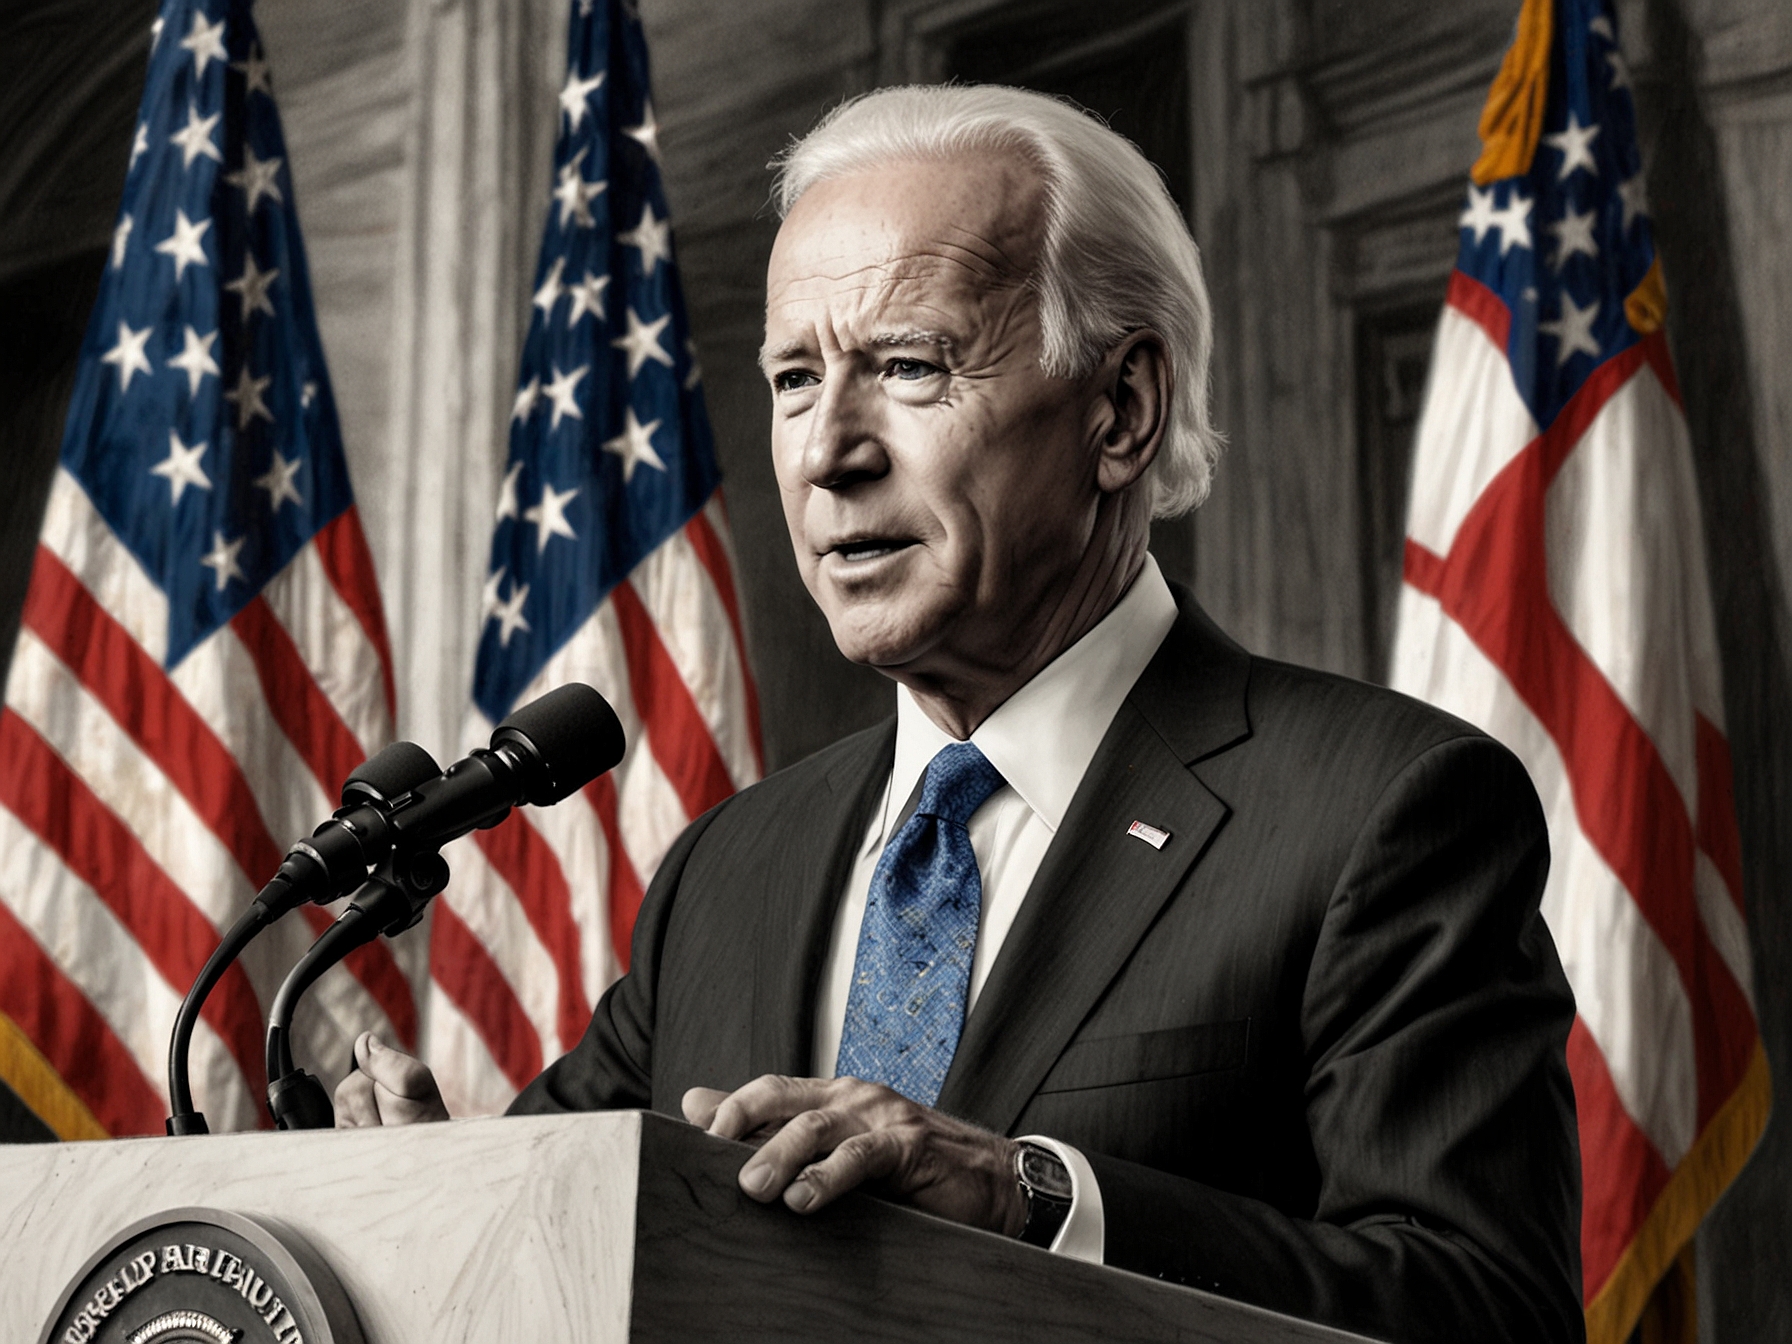 An illustration of President Joe Biden speaking at a podium, emphasizing his administration's focus on renewable energy investments, expanded social safety nets, and healthcare reforms.